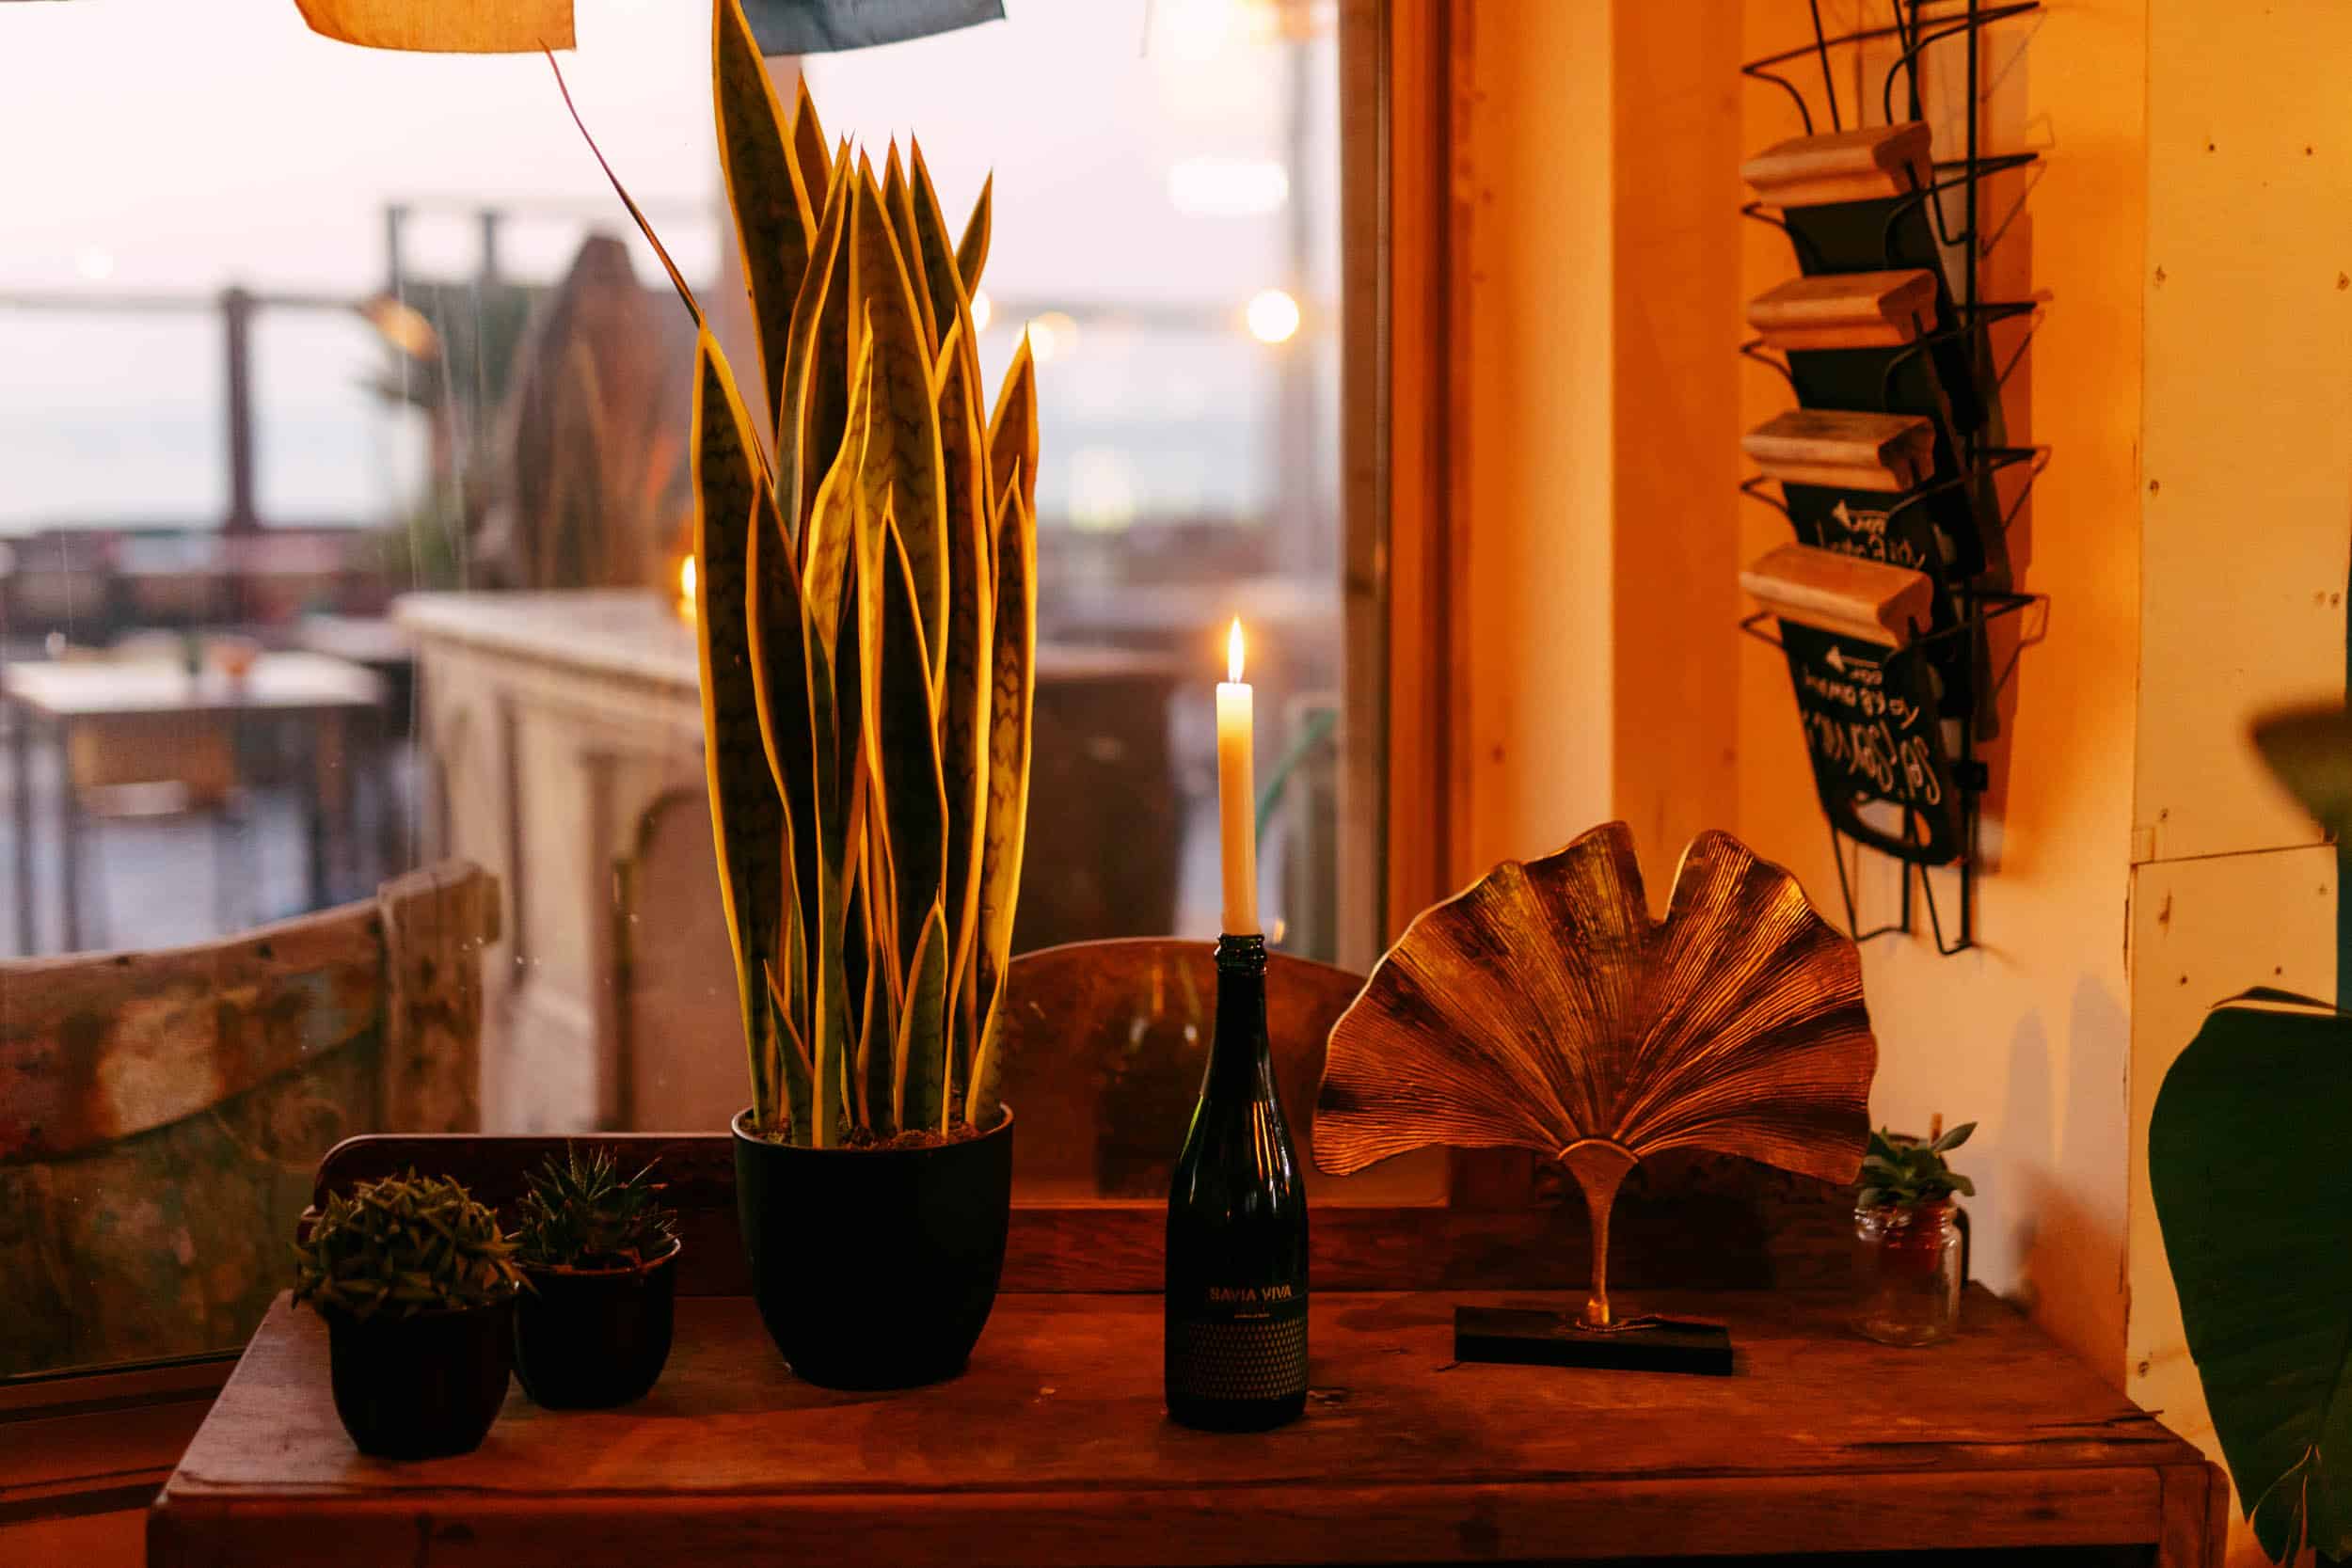 A candle on the table next to a potted plant, creating a peaceful atmosphere with elements of nature.